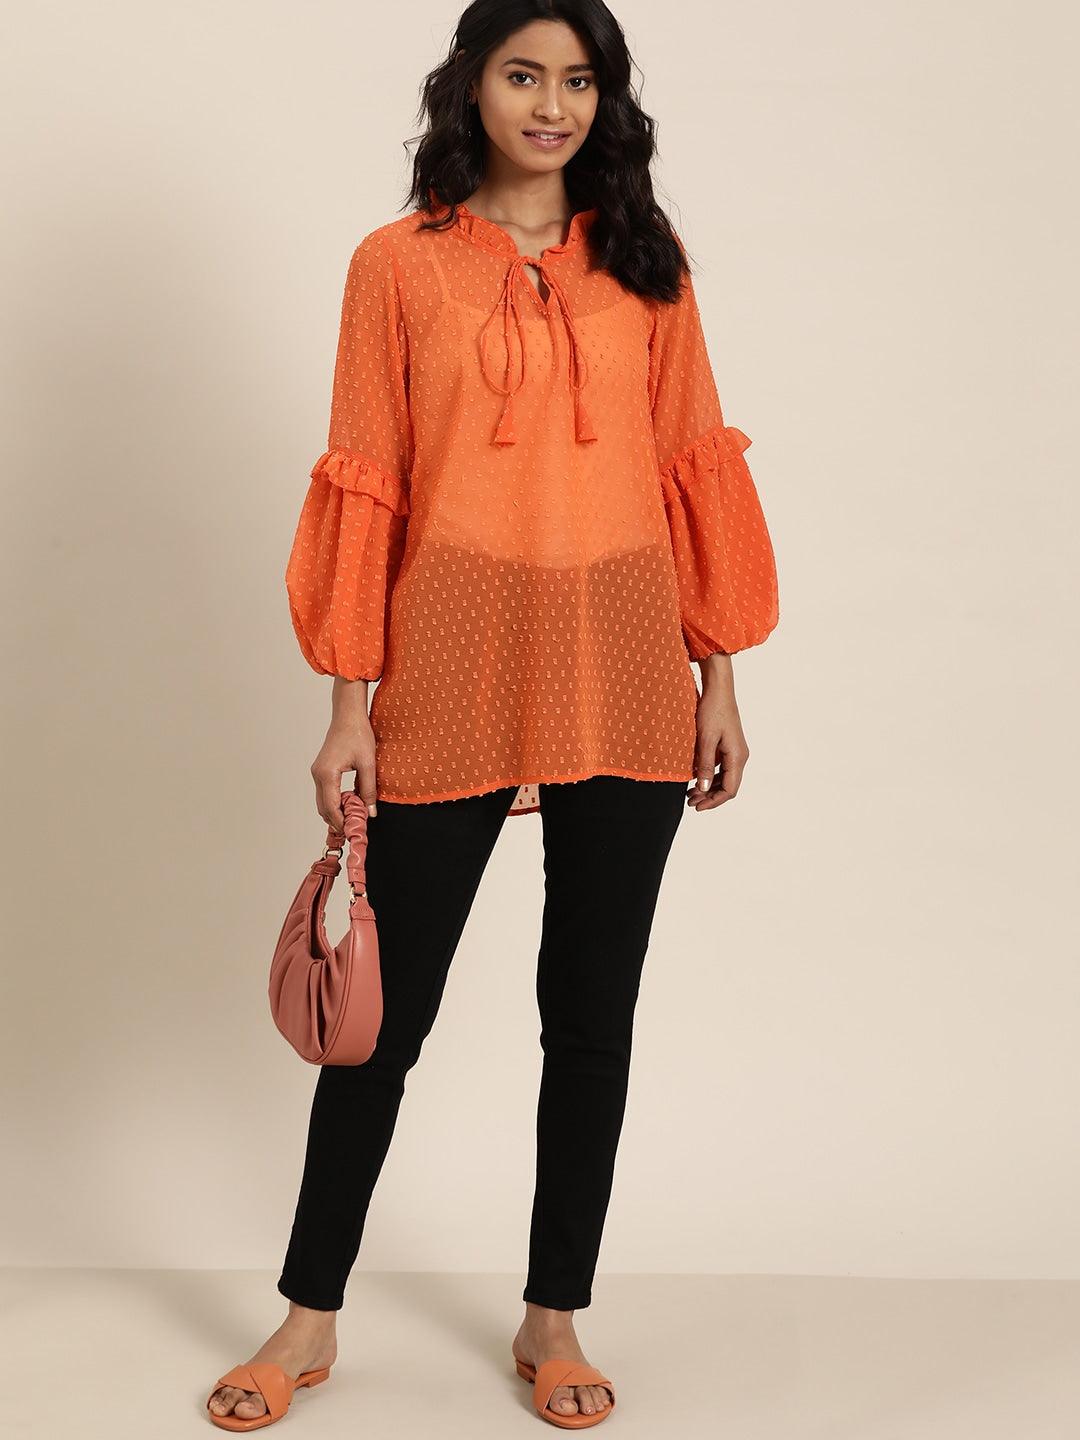 Qurvii Orange Solid Keyhole Neck Puff Sleeves Dobby Weave Top - Qurvii India